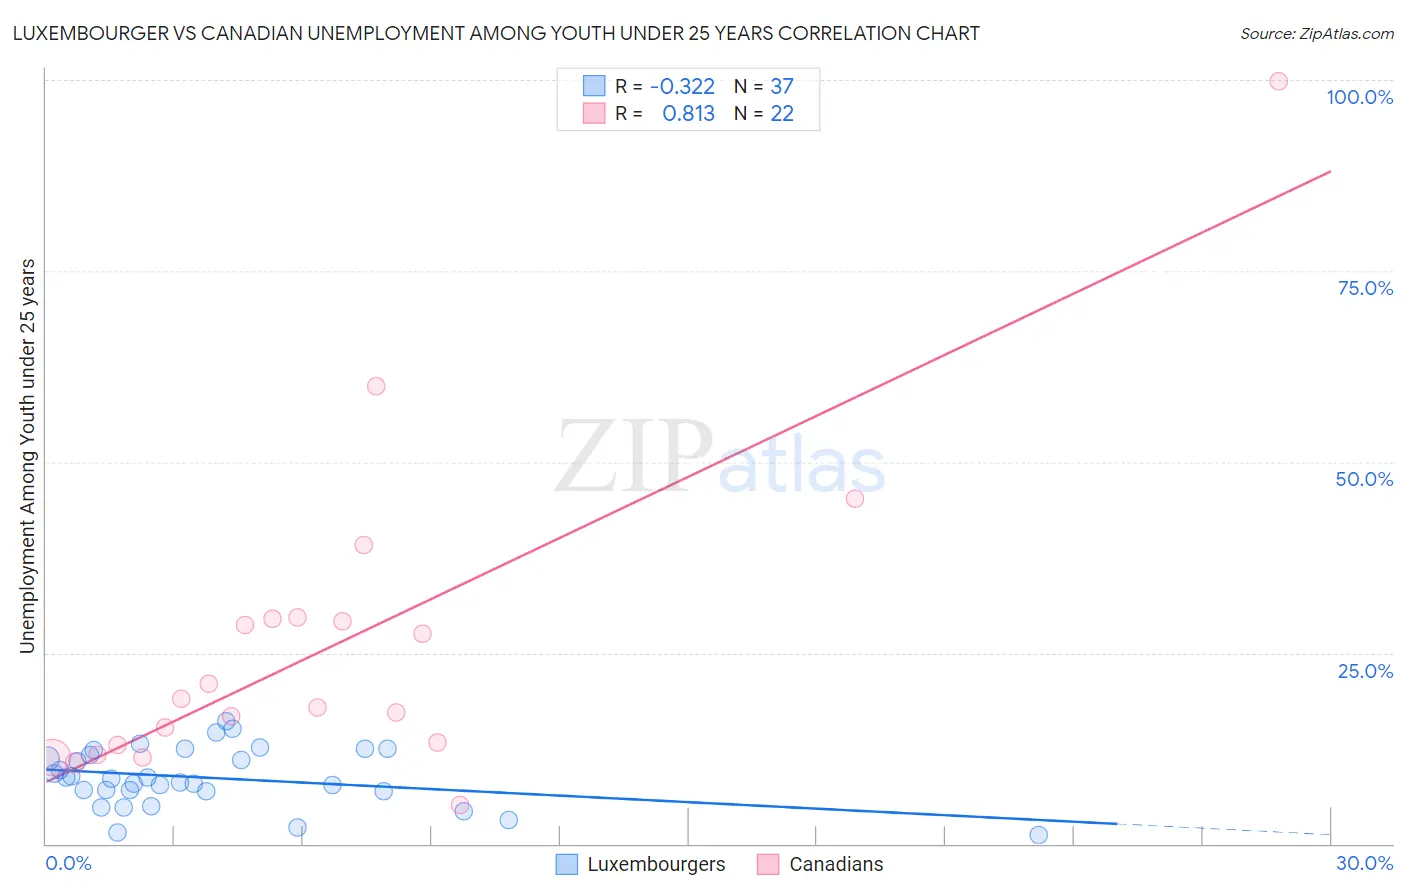 Luxembourger vs Canadian Unemployment Among Youth under 25 years